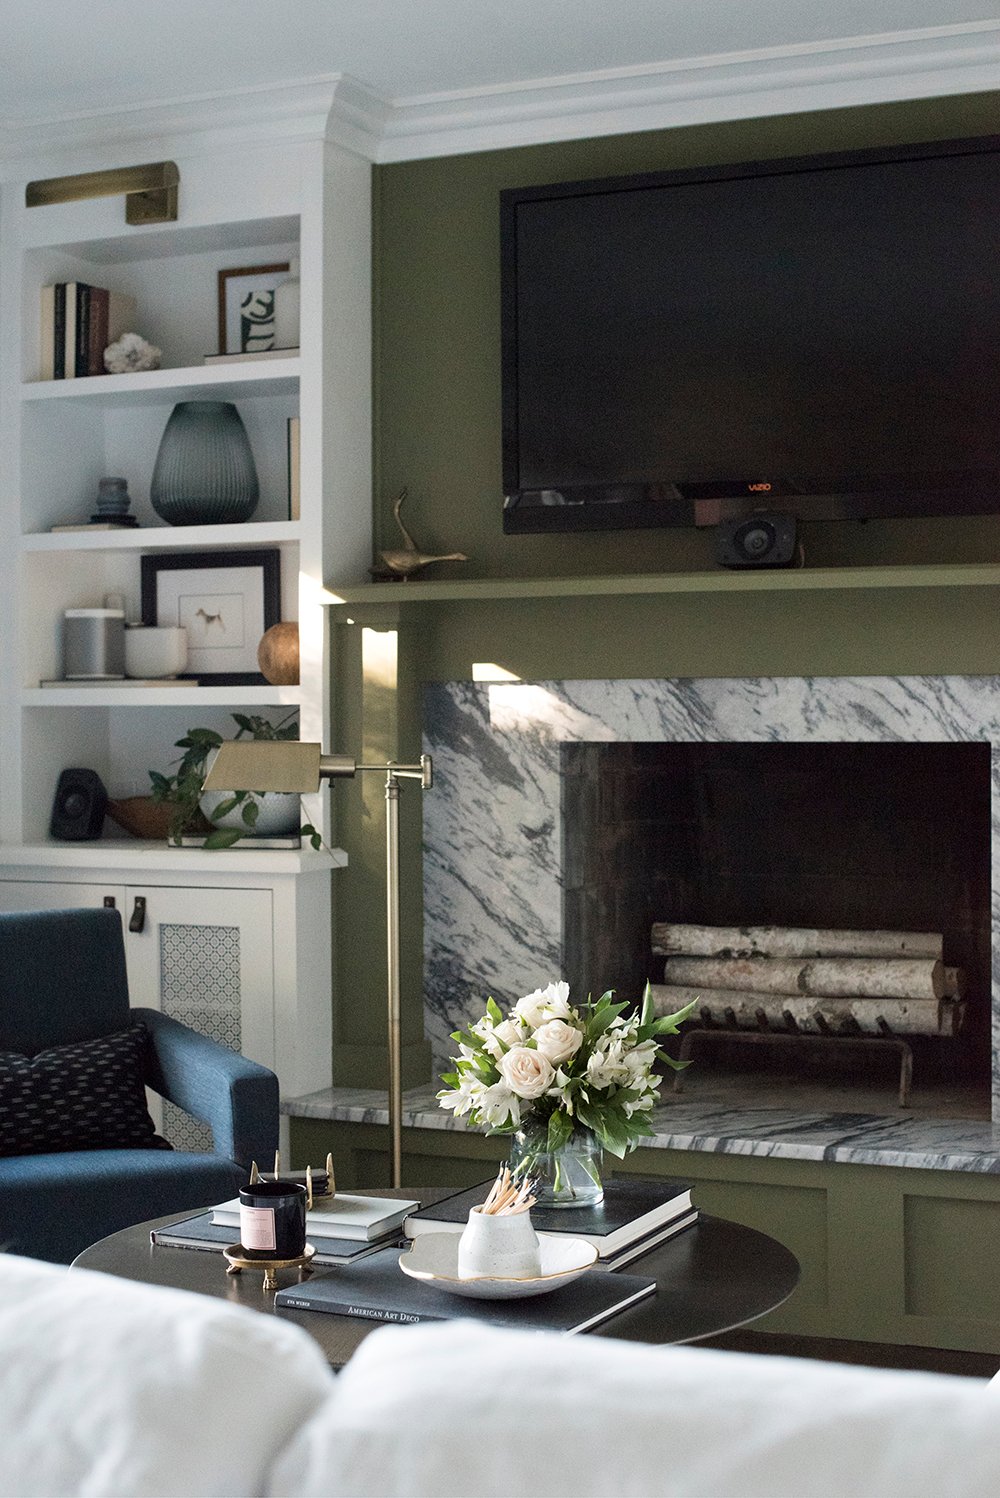 Design Discussion : TV Over the Fireplace - roomfortuesday.com